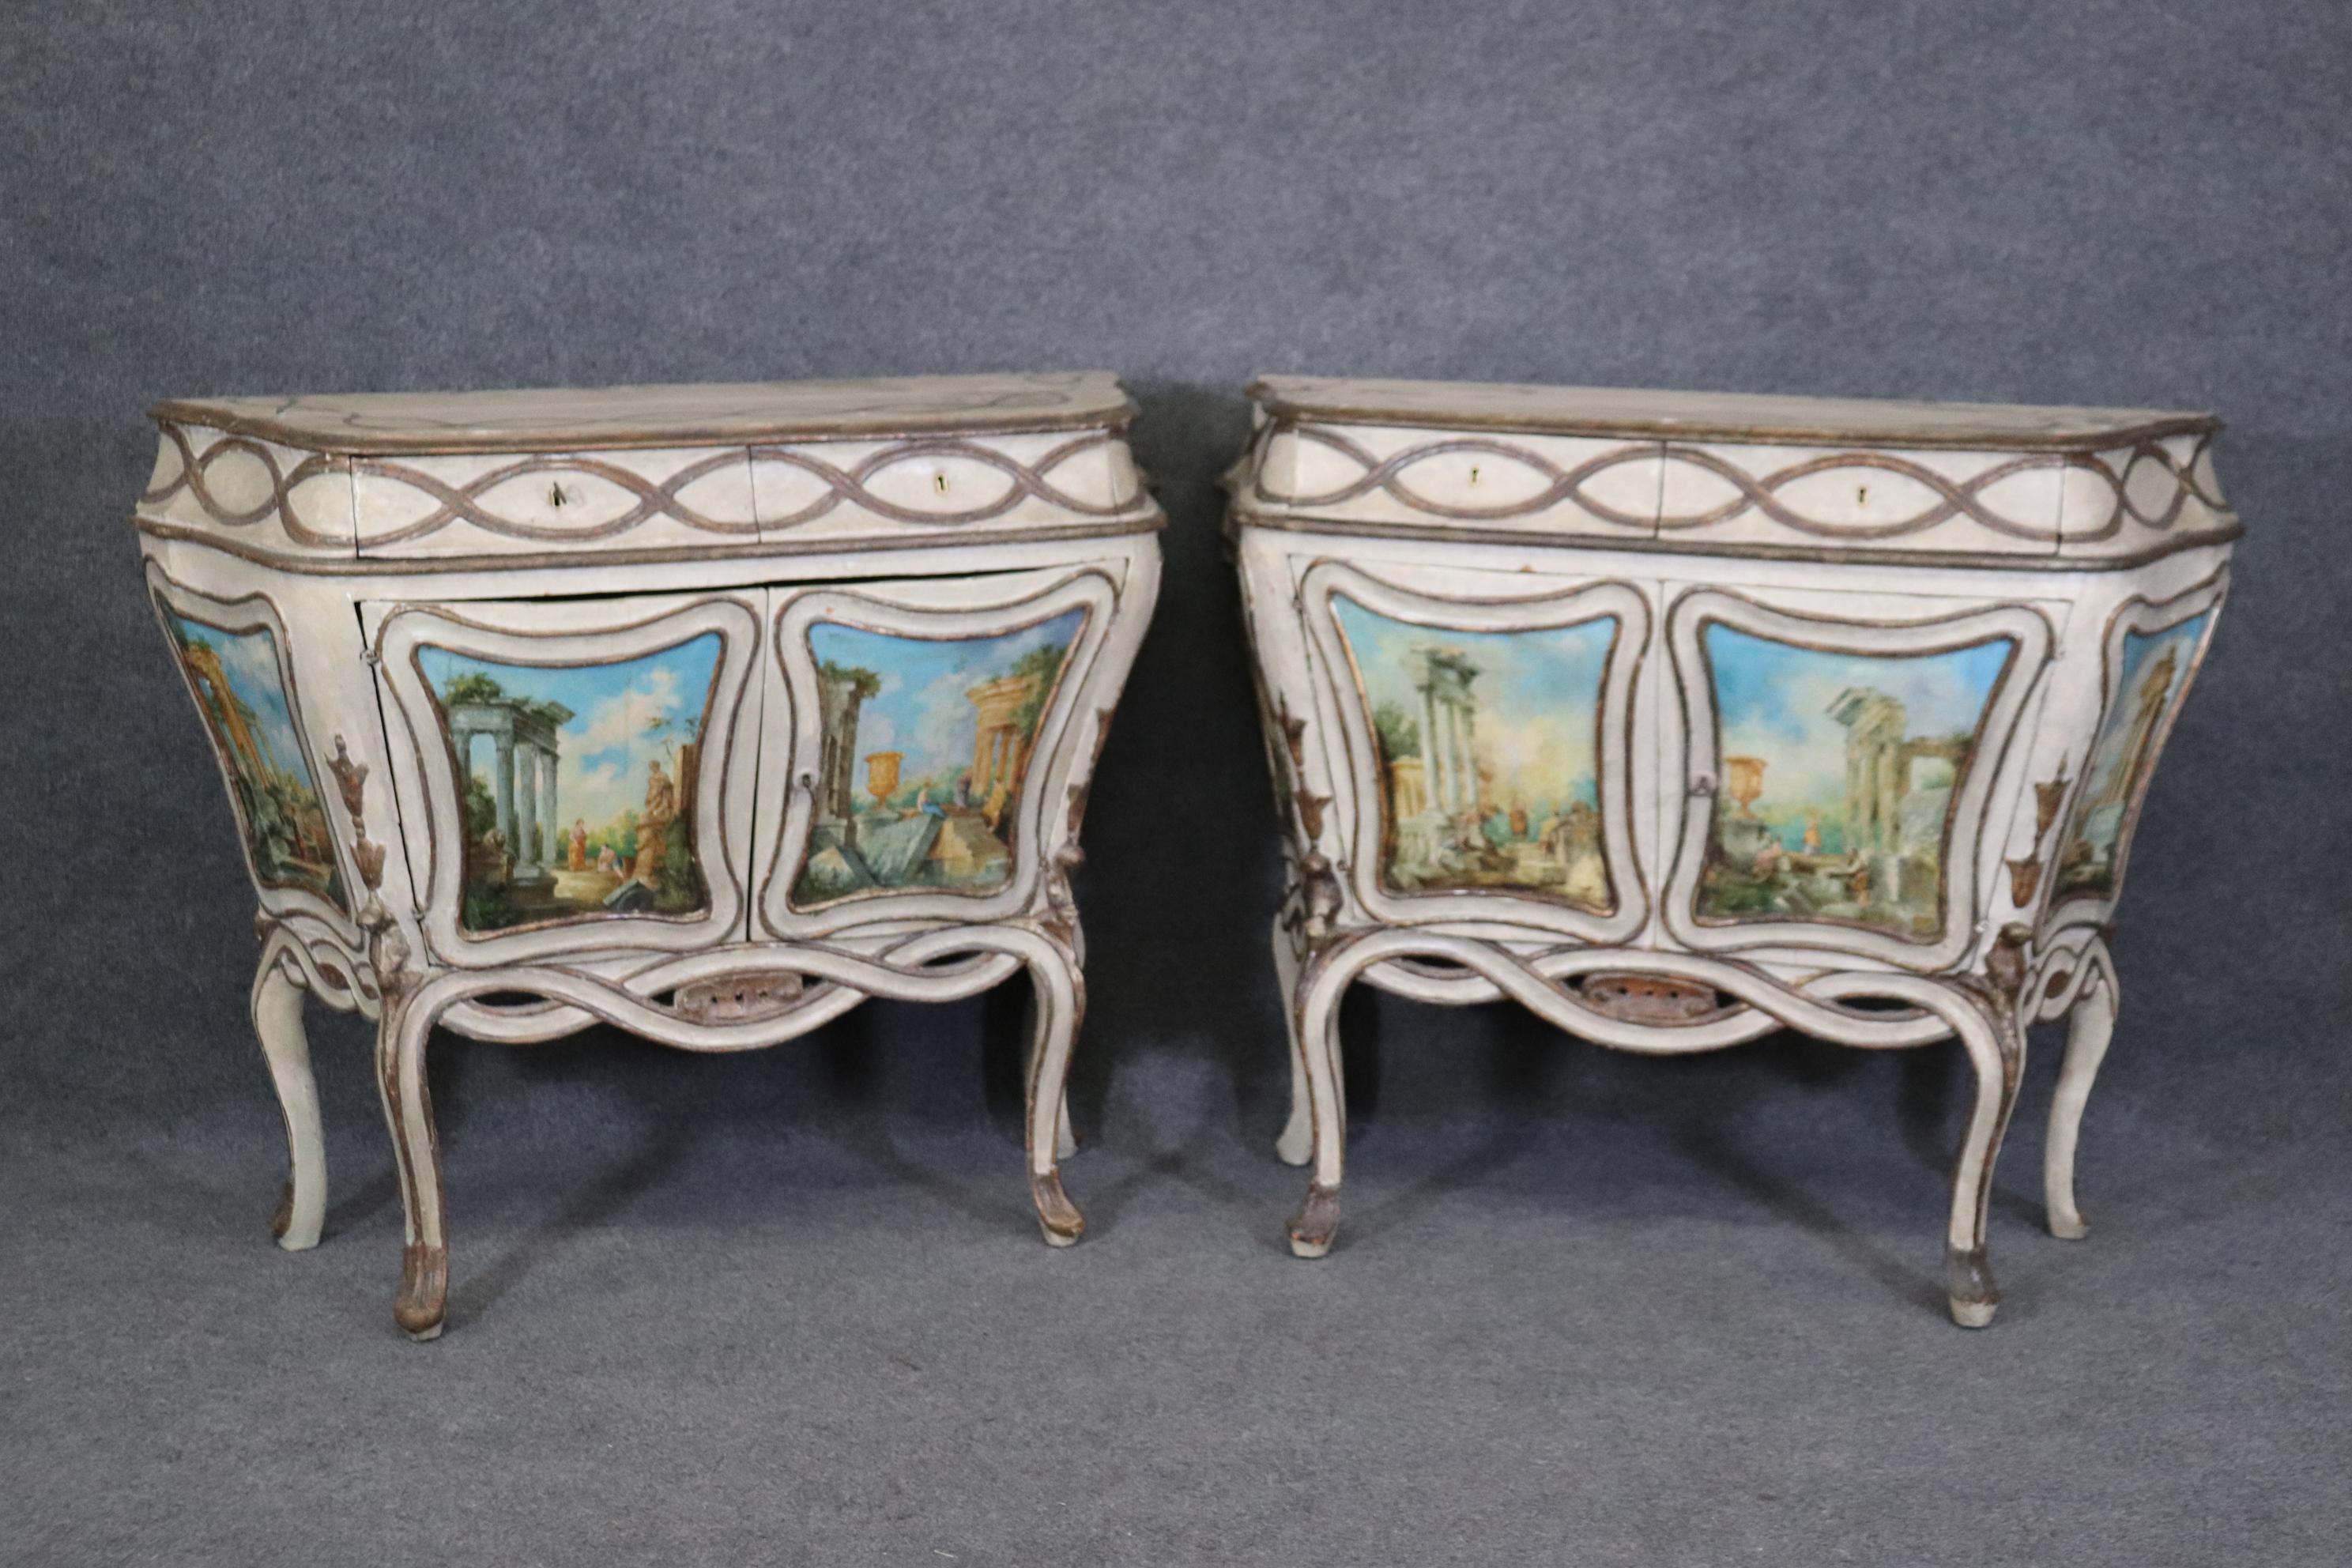 Italian Rare Pair Period 18th Century Paint Decorated  Venetian Commodes Cabinets For Sale